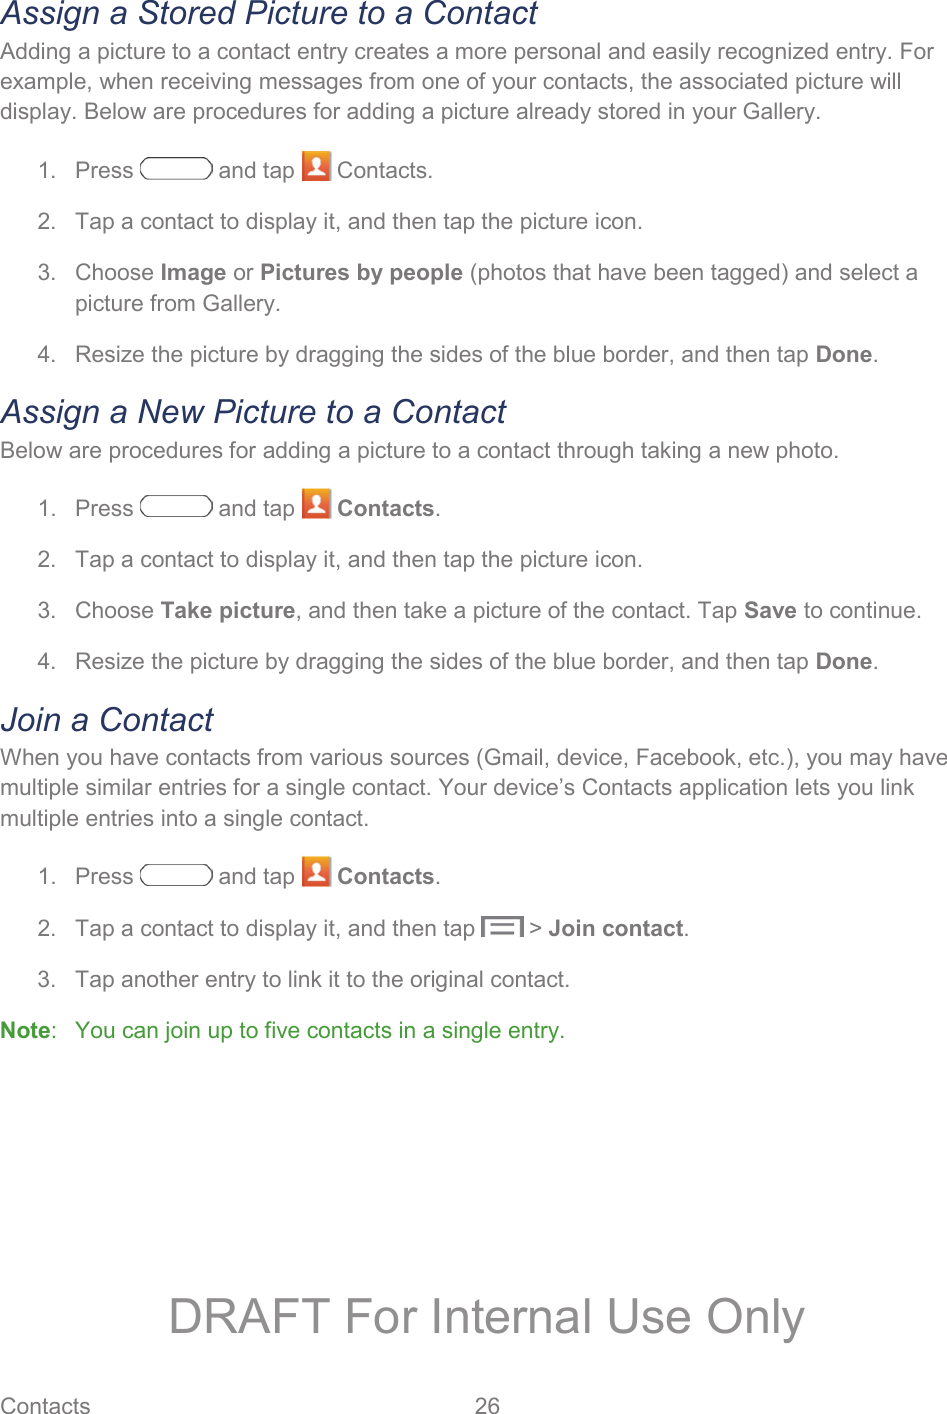 Contacts 26   Assign a Stored Picture to a Contact Adding a picture to a contact entry creates a more personal and easily recognized entry. For example, when receiving messages from one of your contacts, the associated picture will display. Below are procedures for adding a picture already stored in your Gallery. 1.  Press   and tap   Contacts. 2.  Tap a contact to display it, and then tap the picture icon. 3. Choose Image or Pictures by people (photos that have been tagged) and select a picture from Gallery. 4.  Resize the picture by dragging the sides of the blue border, and then tap Done. Assign a New Picture to a Contact Below are procedures for adding a picture to a contact through taking a new photo. 1. Press   and tap   Contacts. 2.  Tap a contact to display it, and then tap the picture icon. 3. Choose Take picture, and then take a picture of the contact. Tap Save to continue. 4.  Resize the picture by dragging the sides of the blue border, and then tap Done. Join a Contact When you have contacts from various sources (Gmail, device, Facebook, etc.), you may have multiple similar entries for a single contact. Your device’s Contacts application lets you link multiple entries into a single contact. 1. Press   and tap   Contacts. 2.  Tap a contact to display it, and then tap   &gt; Join contact. 3.  Tap another entry to link it to the original contact. Note:   You can join up to five contacts in a single entry. DRAFT For Internal Use Only